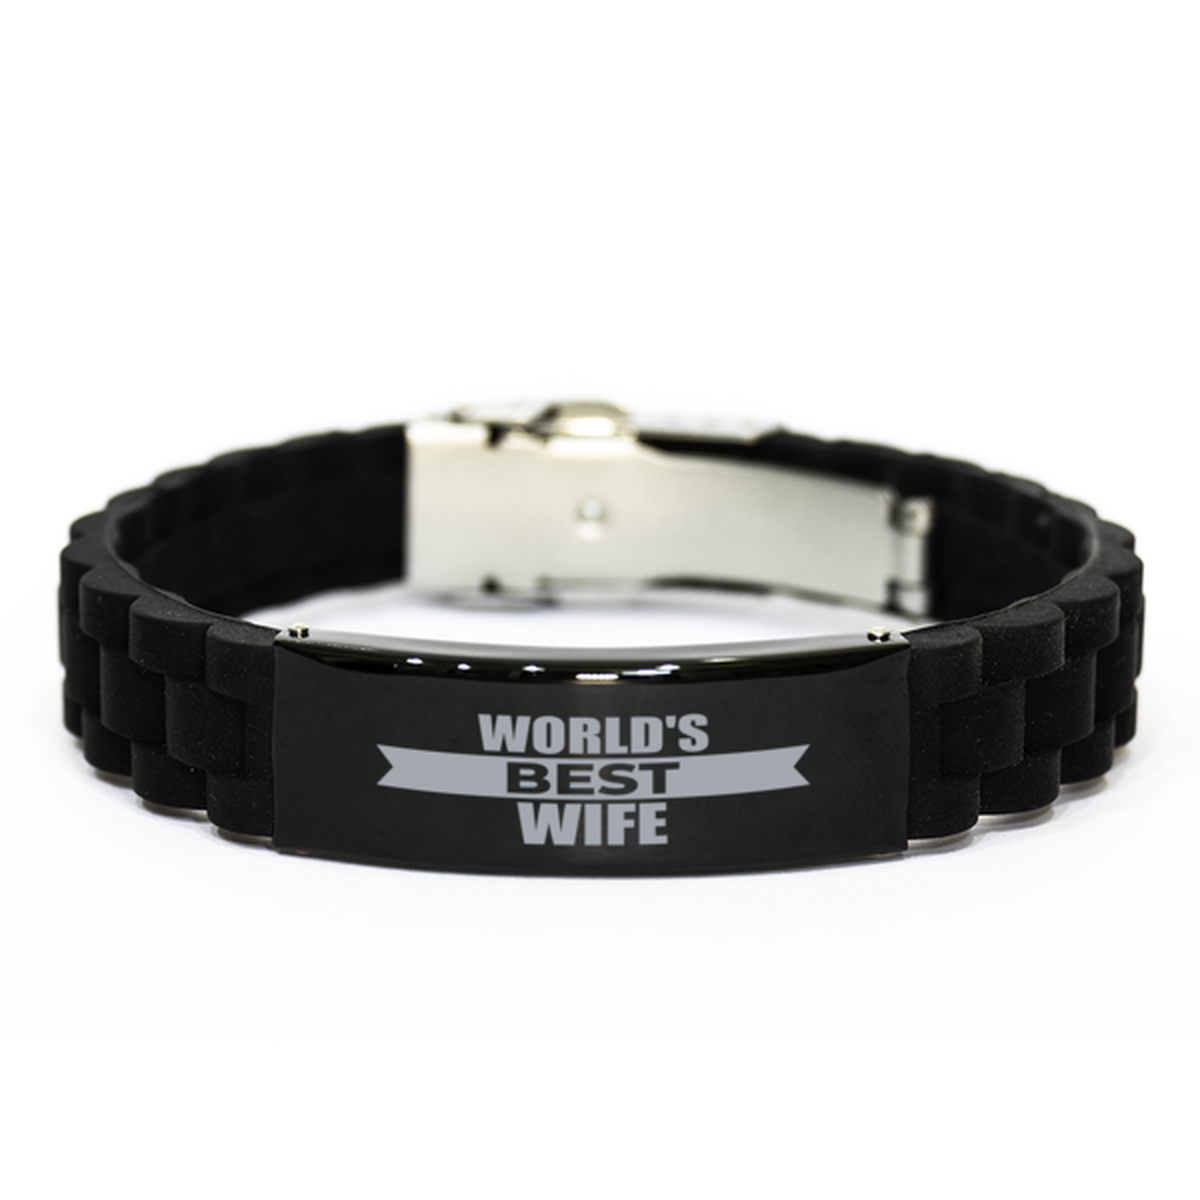 World's Best Wife Gifts, Funny Black Engraved Bracelet For Wife, Family Gifts For Women